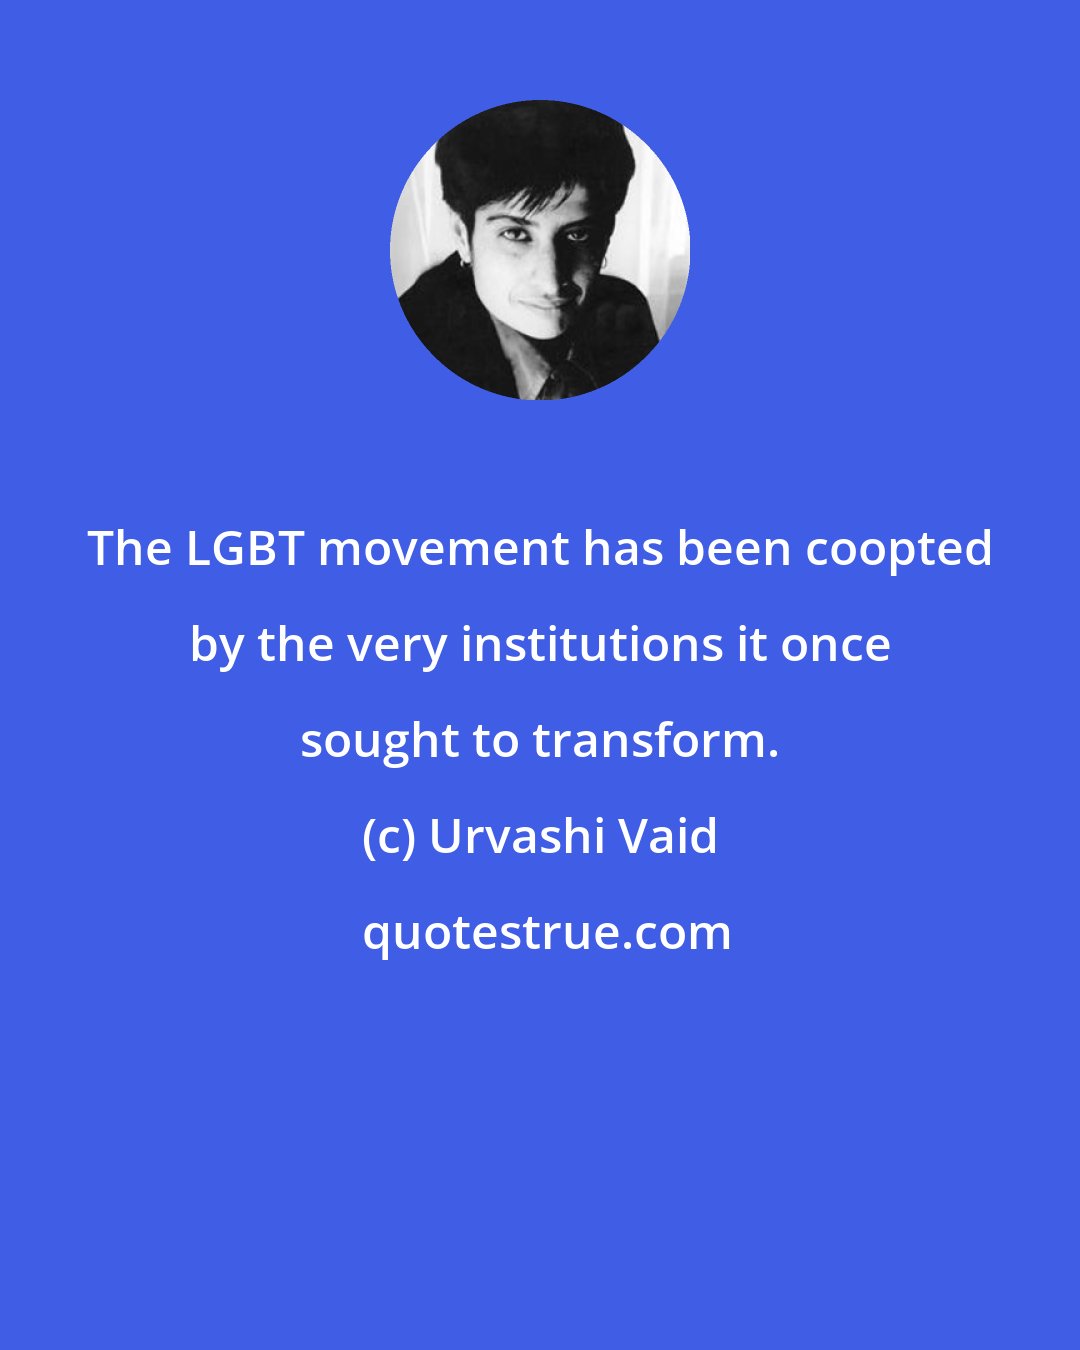 Urvashi Vaid: The LGBT movement has been coopted by the very institutions it once sought to transform.